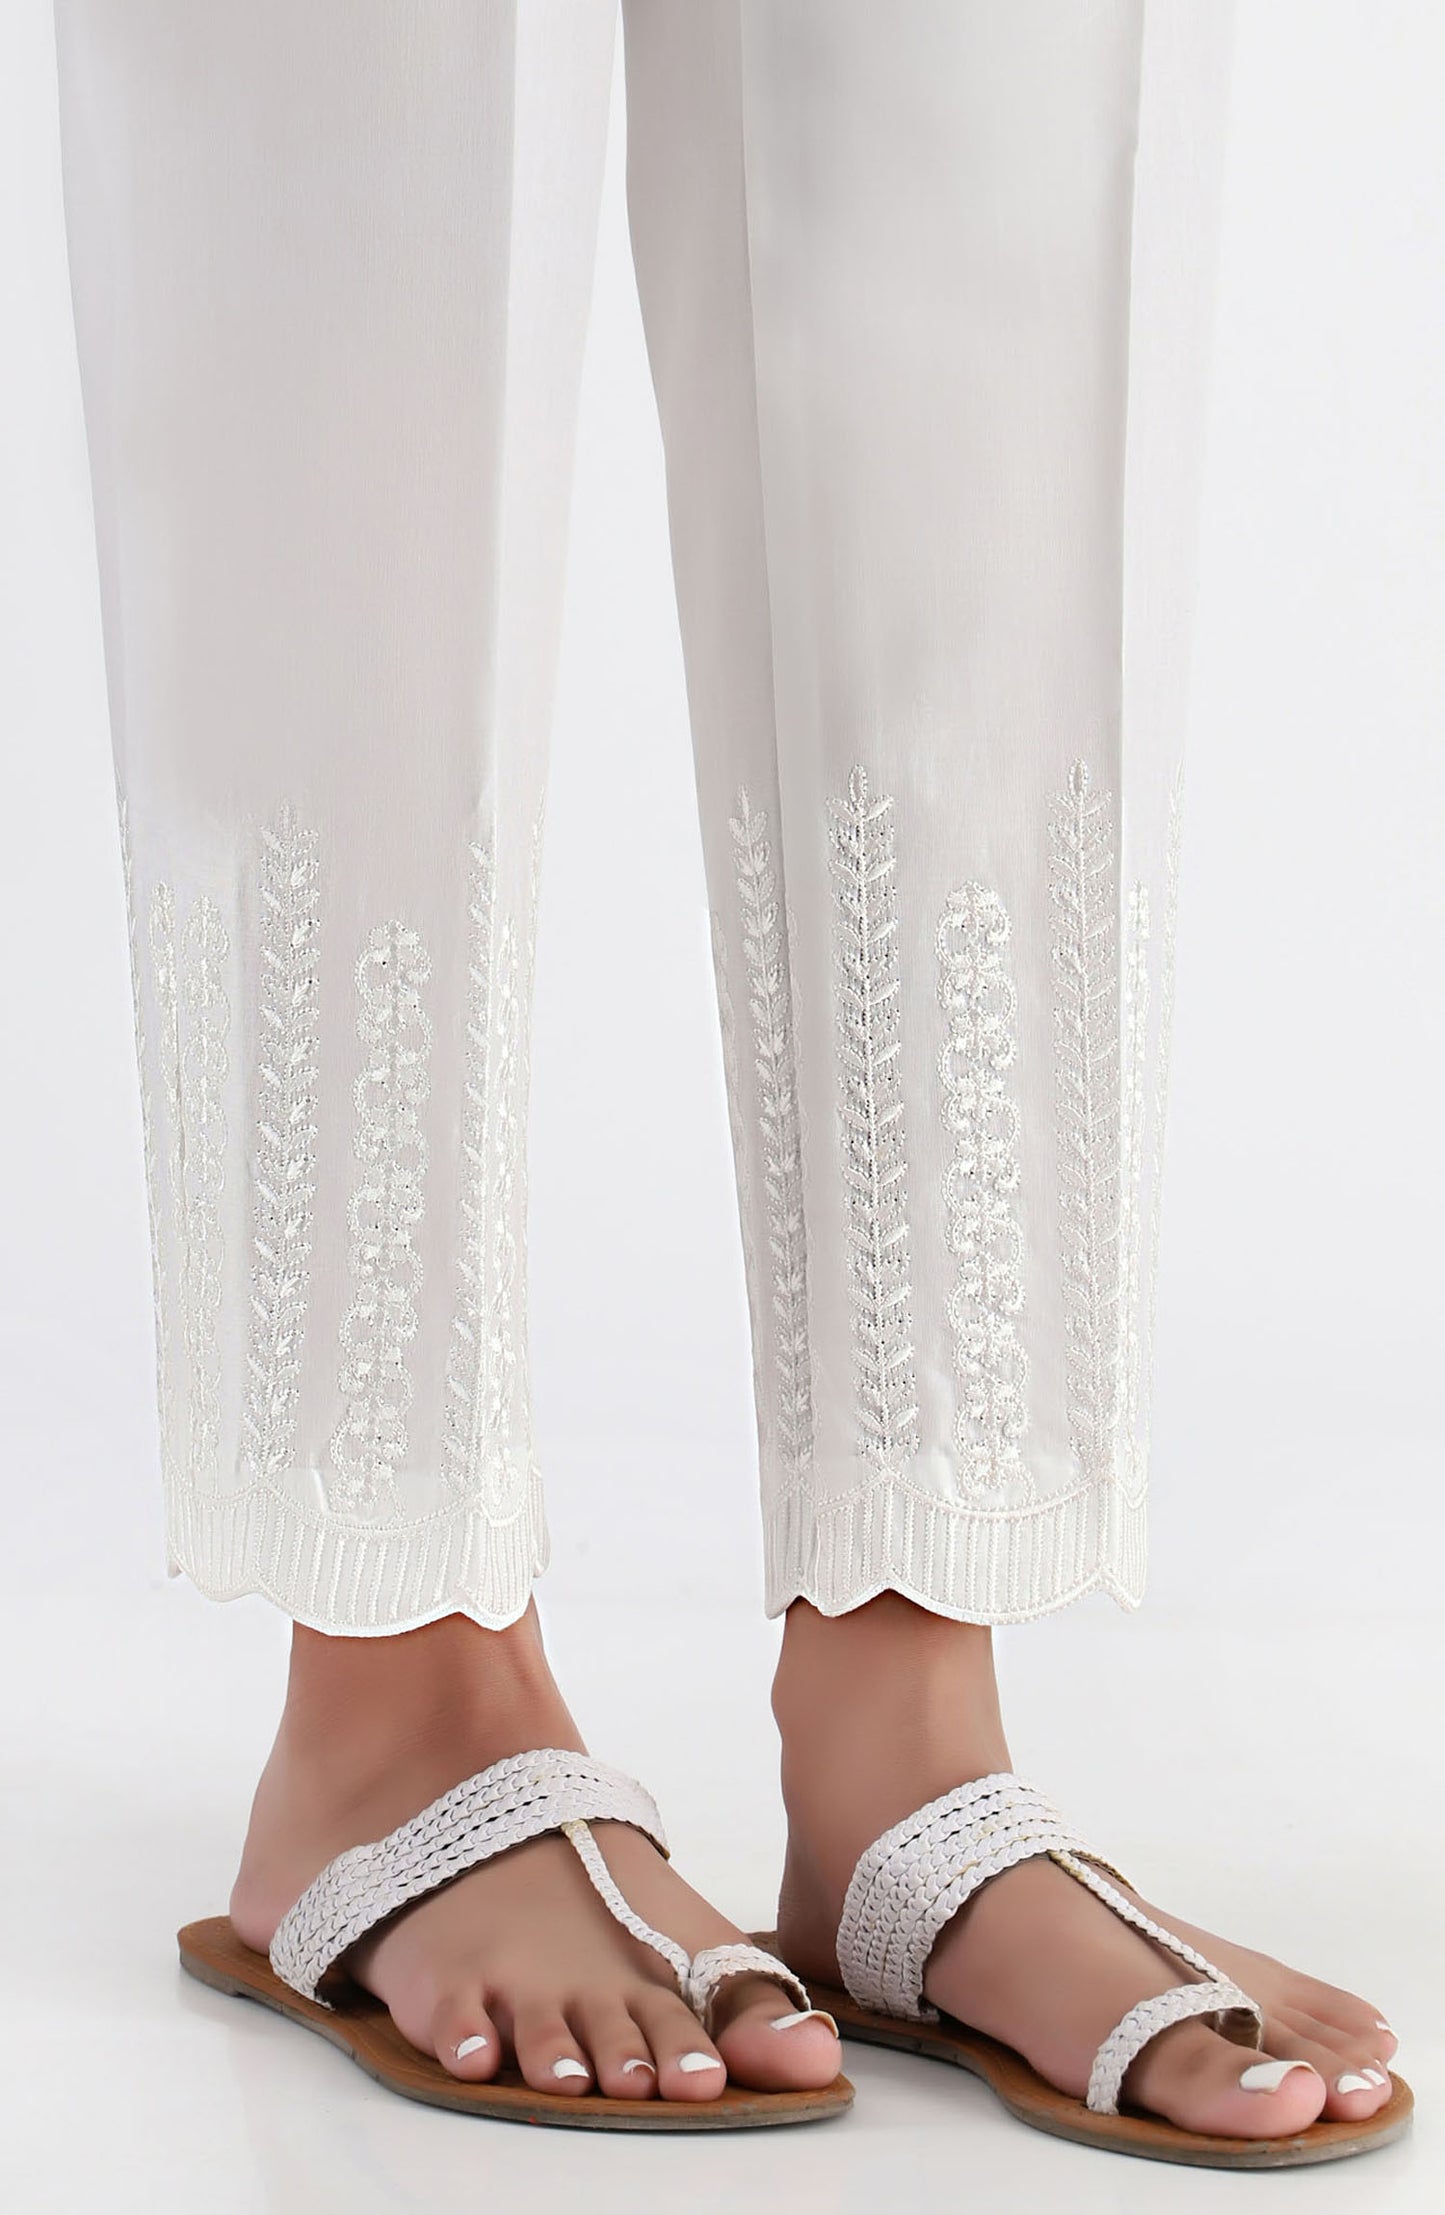 Stitched Embroidered Straight Pants- White (NRPE-026 WHITE)